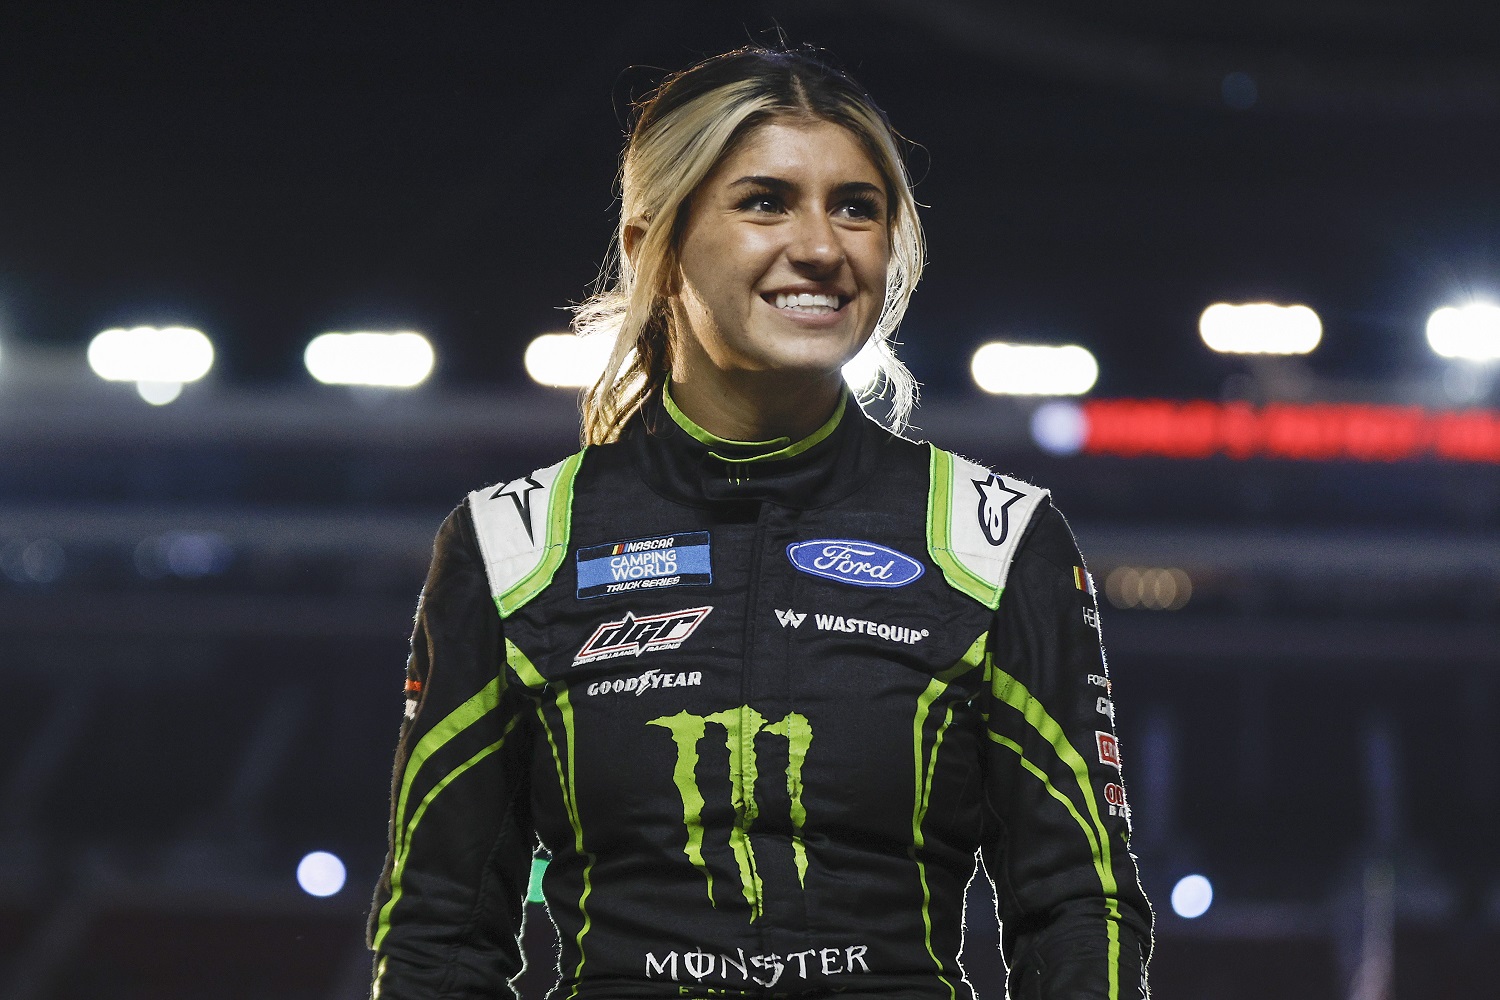 Hailie Deegan walks onstage during driver intros prior to the NASCAR Camping World Truck Series UNOH 200 at Bristol Motor Speedway on Sept. 15, 2022 in Bristol, Tennessee.